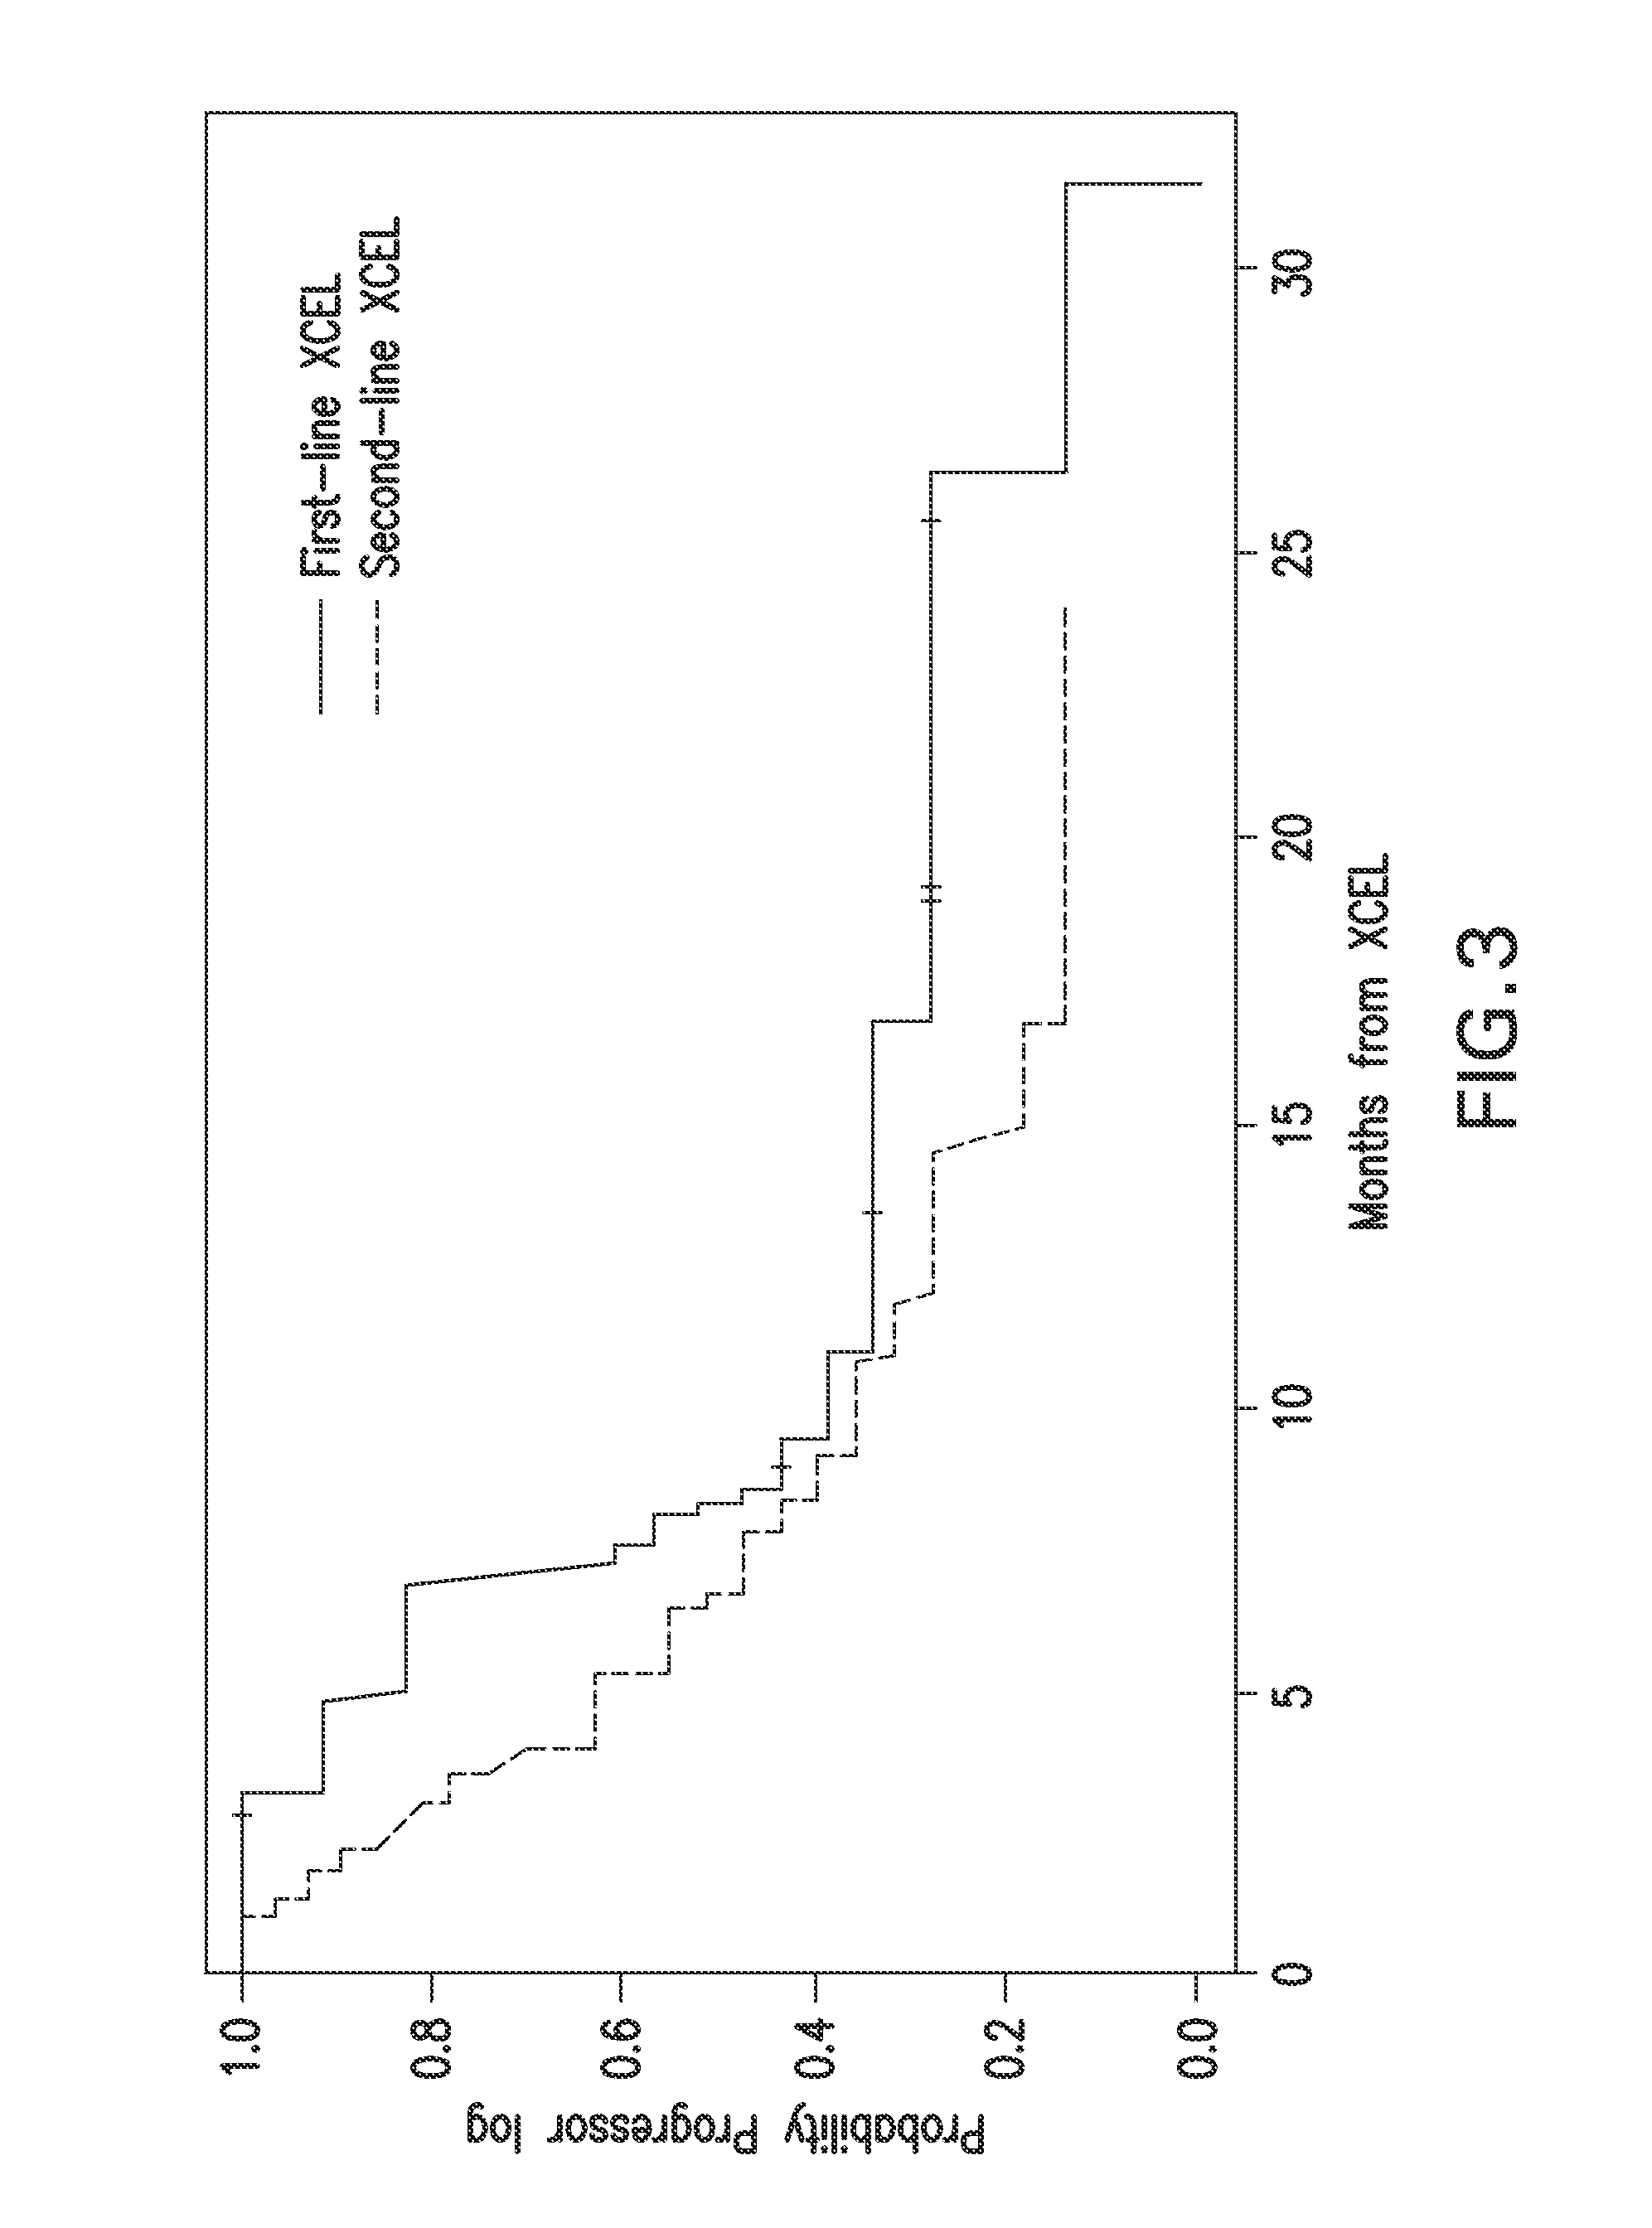 Method for determining complete response to anticancer therapy